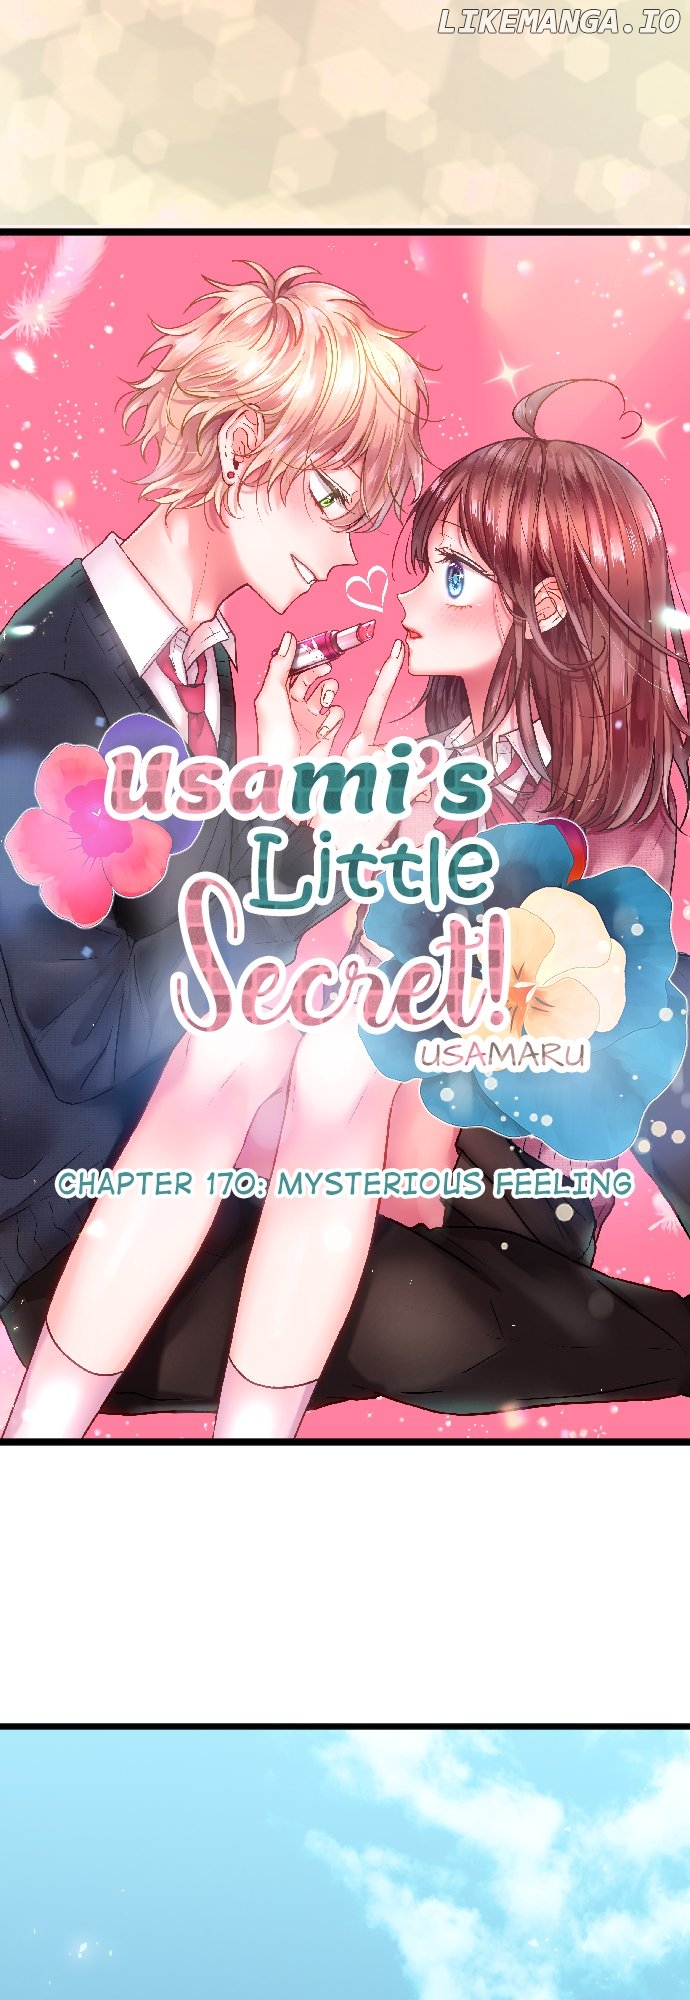 Usami’s Little Secret! Chapter 170 - page 5